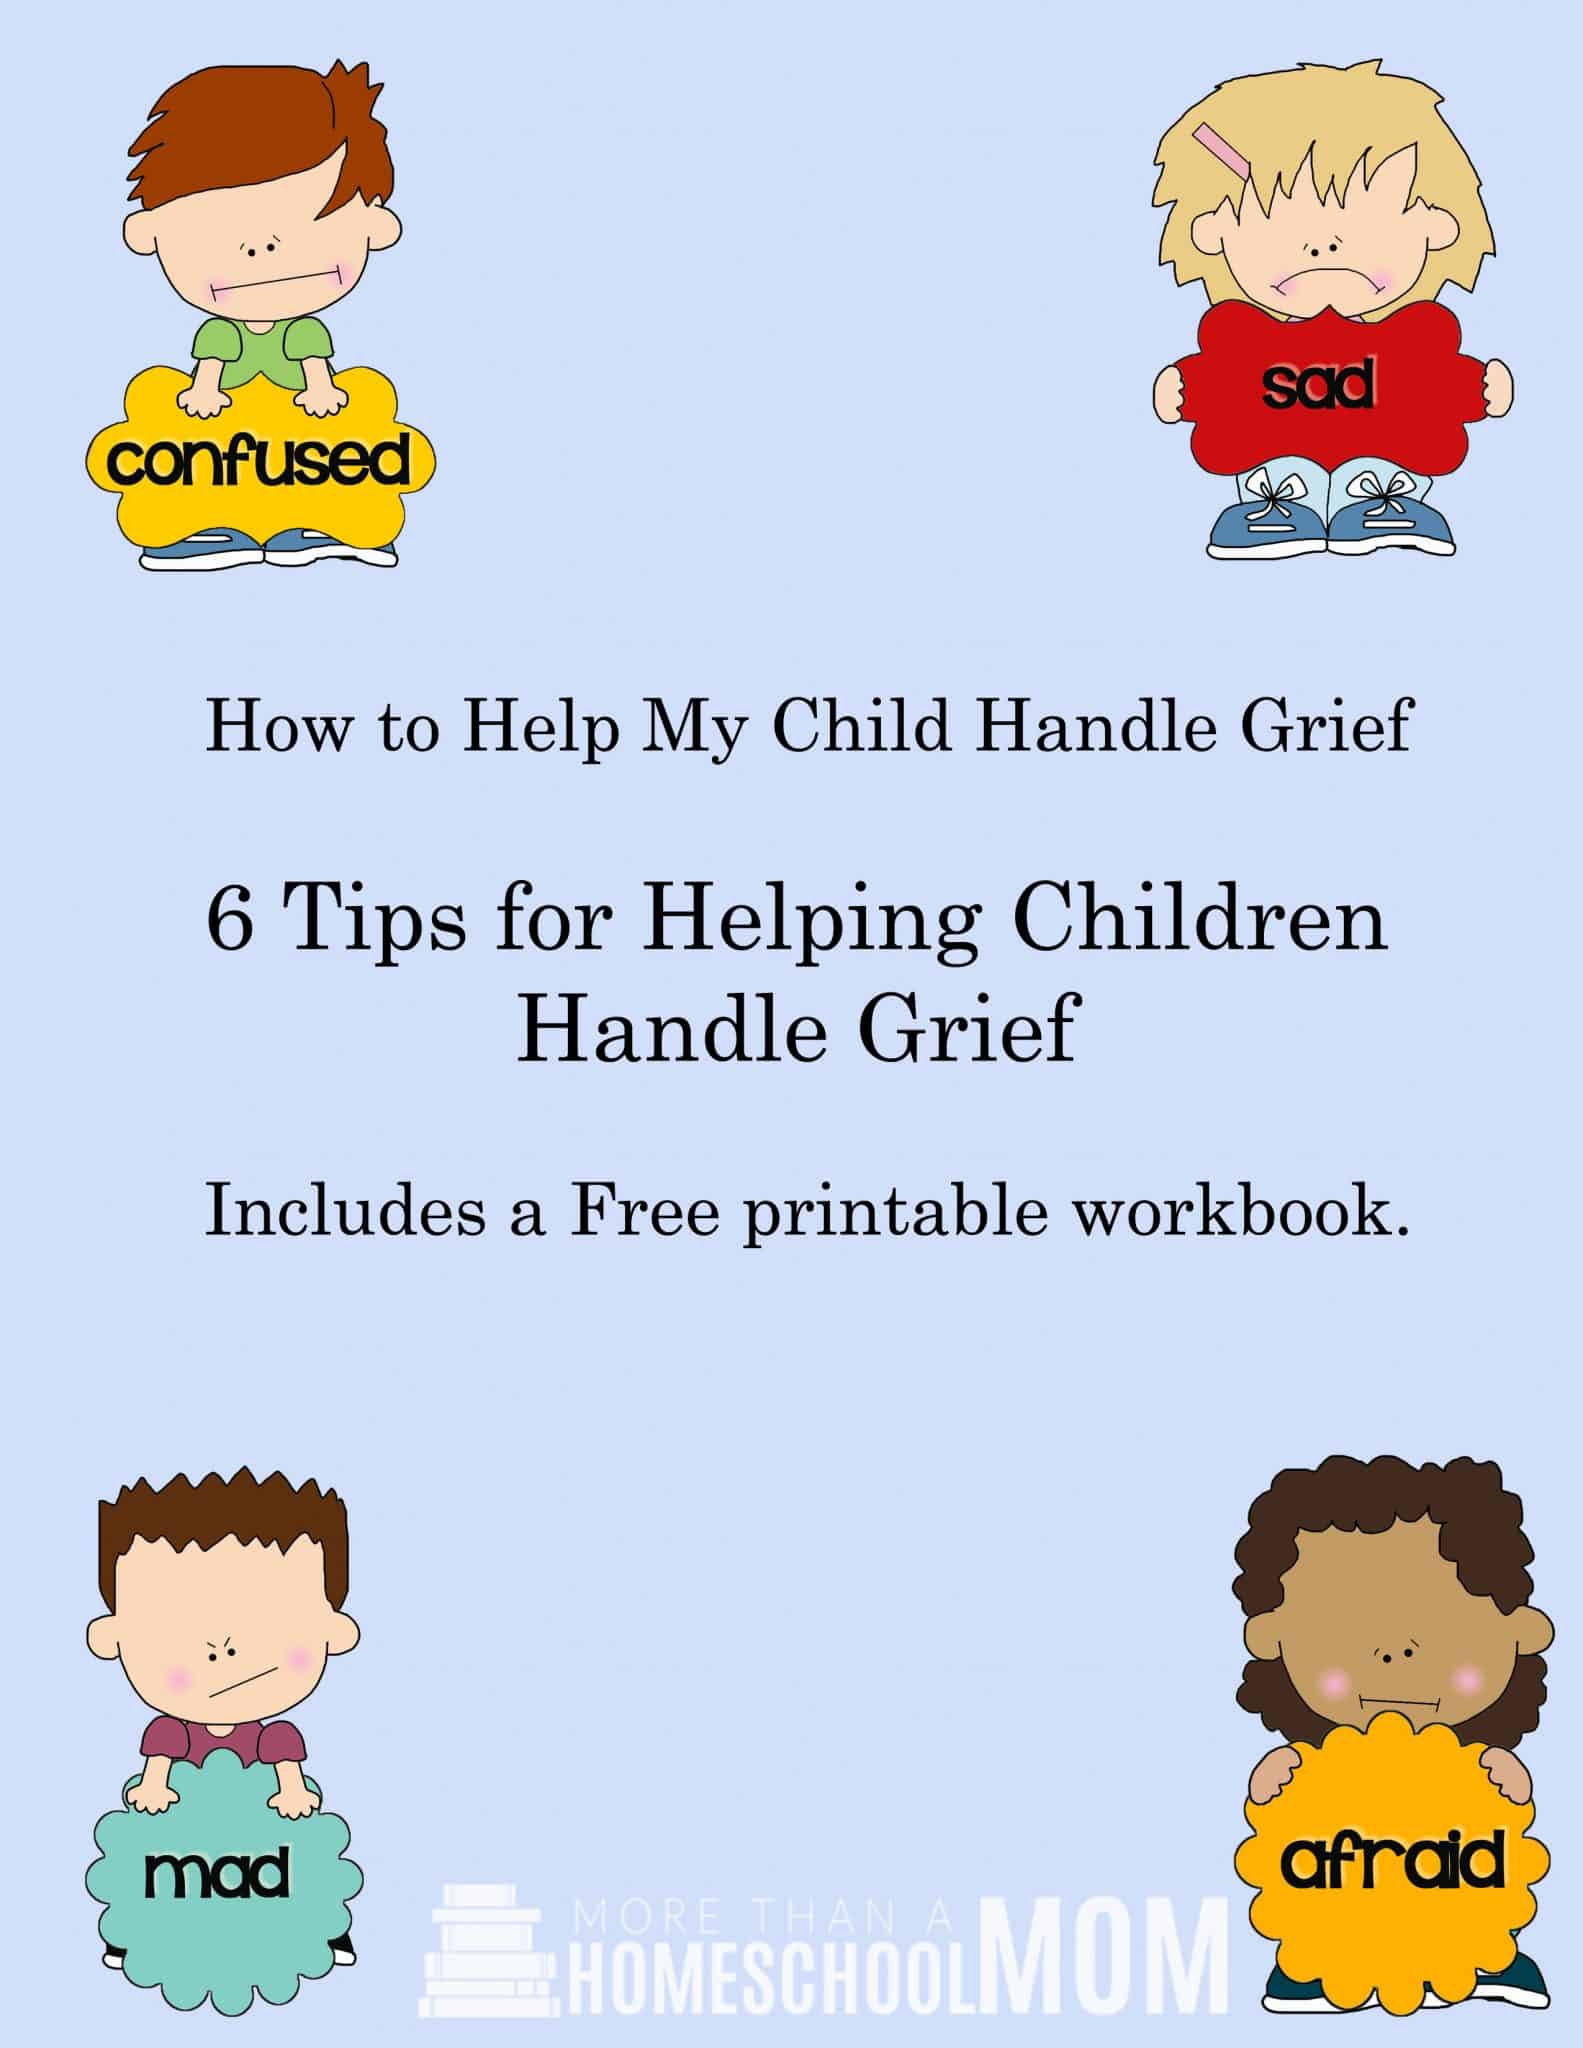 How to help my child handle Grief